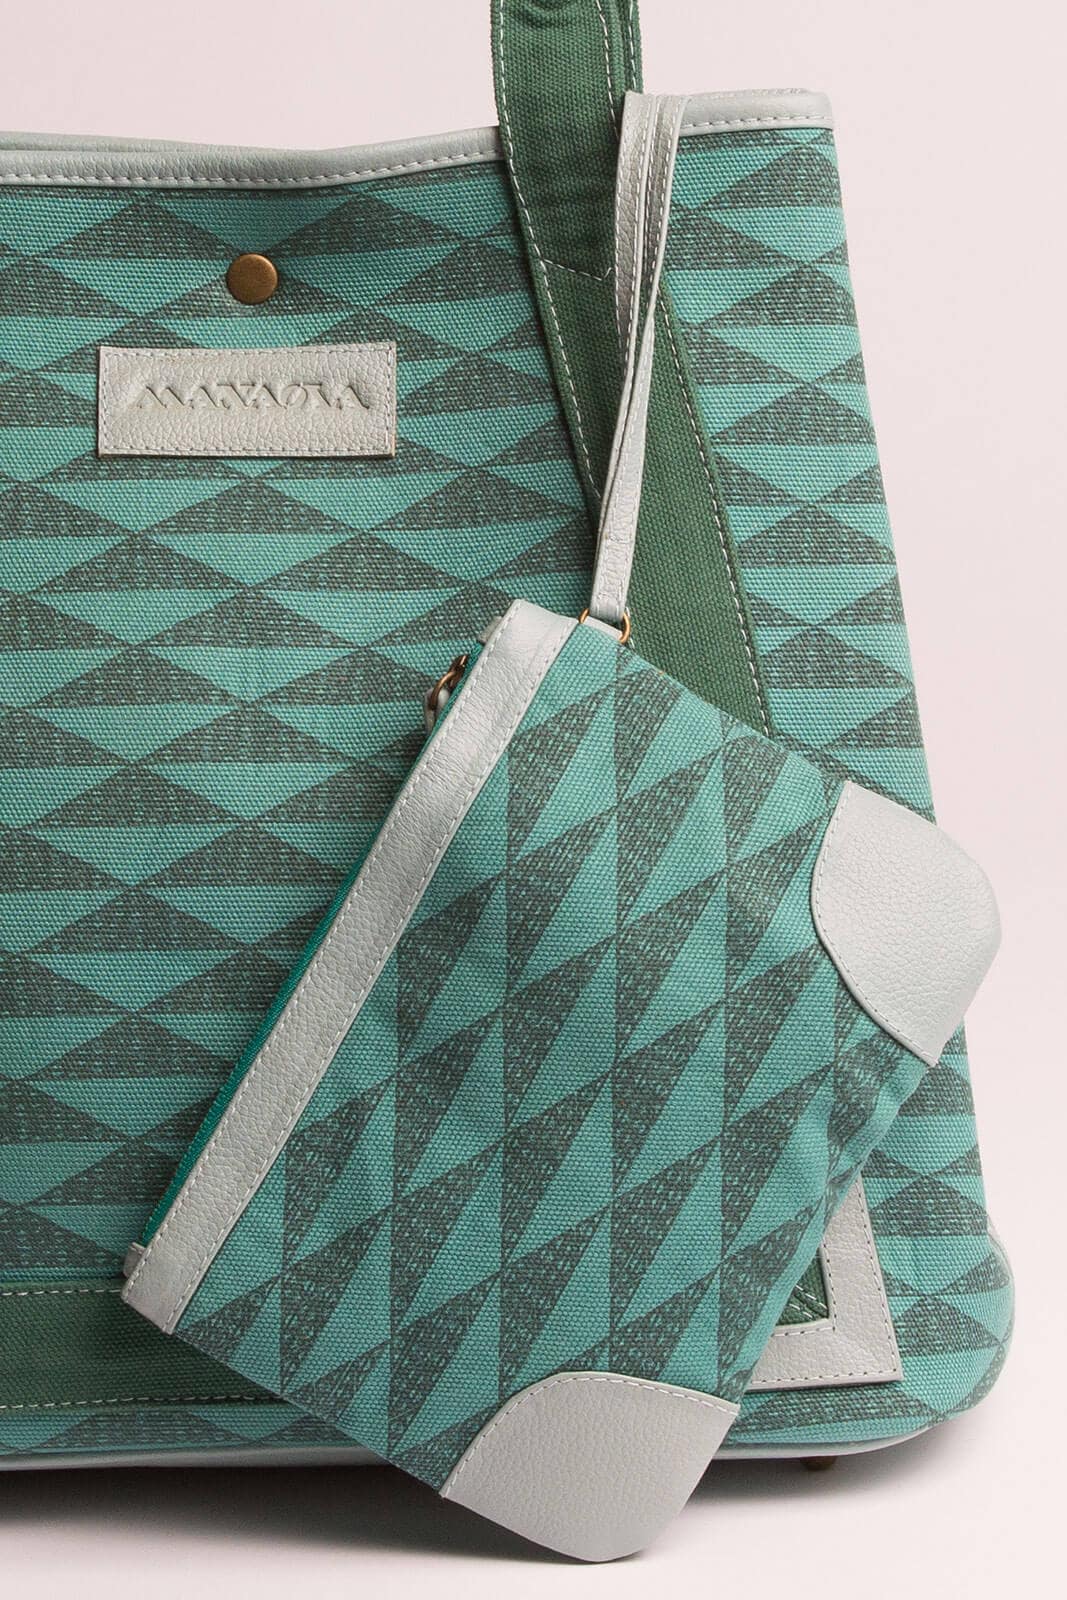 Manaola wristlet in green and teal